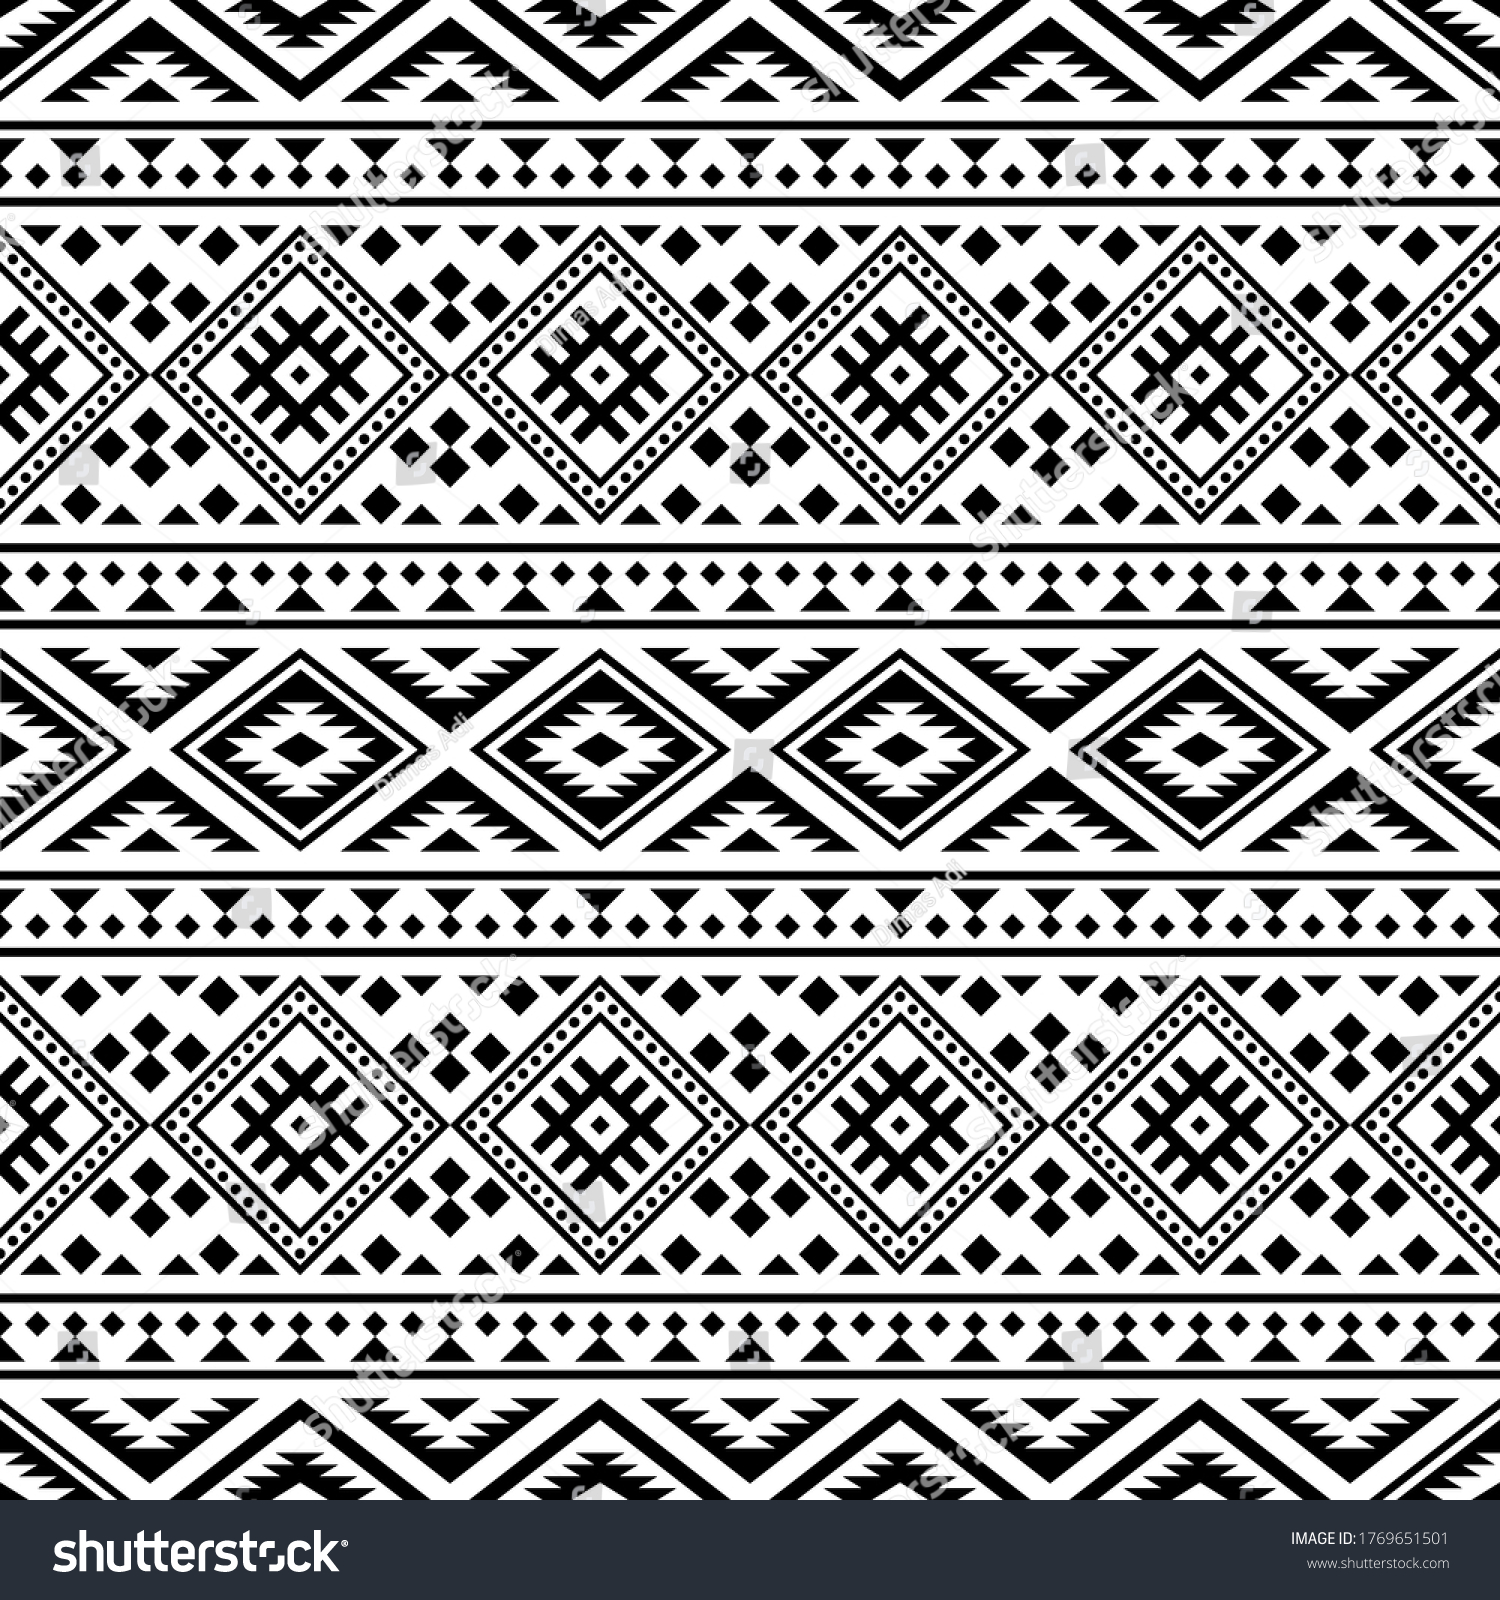 Aztec Seamless Pattern Texture Background Design Stock Vector (Royalty ...